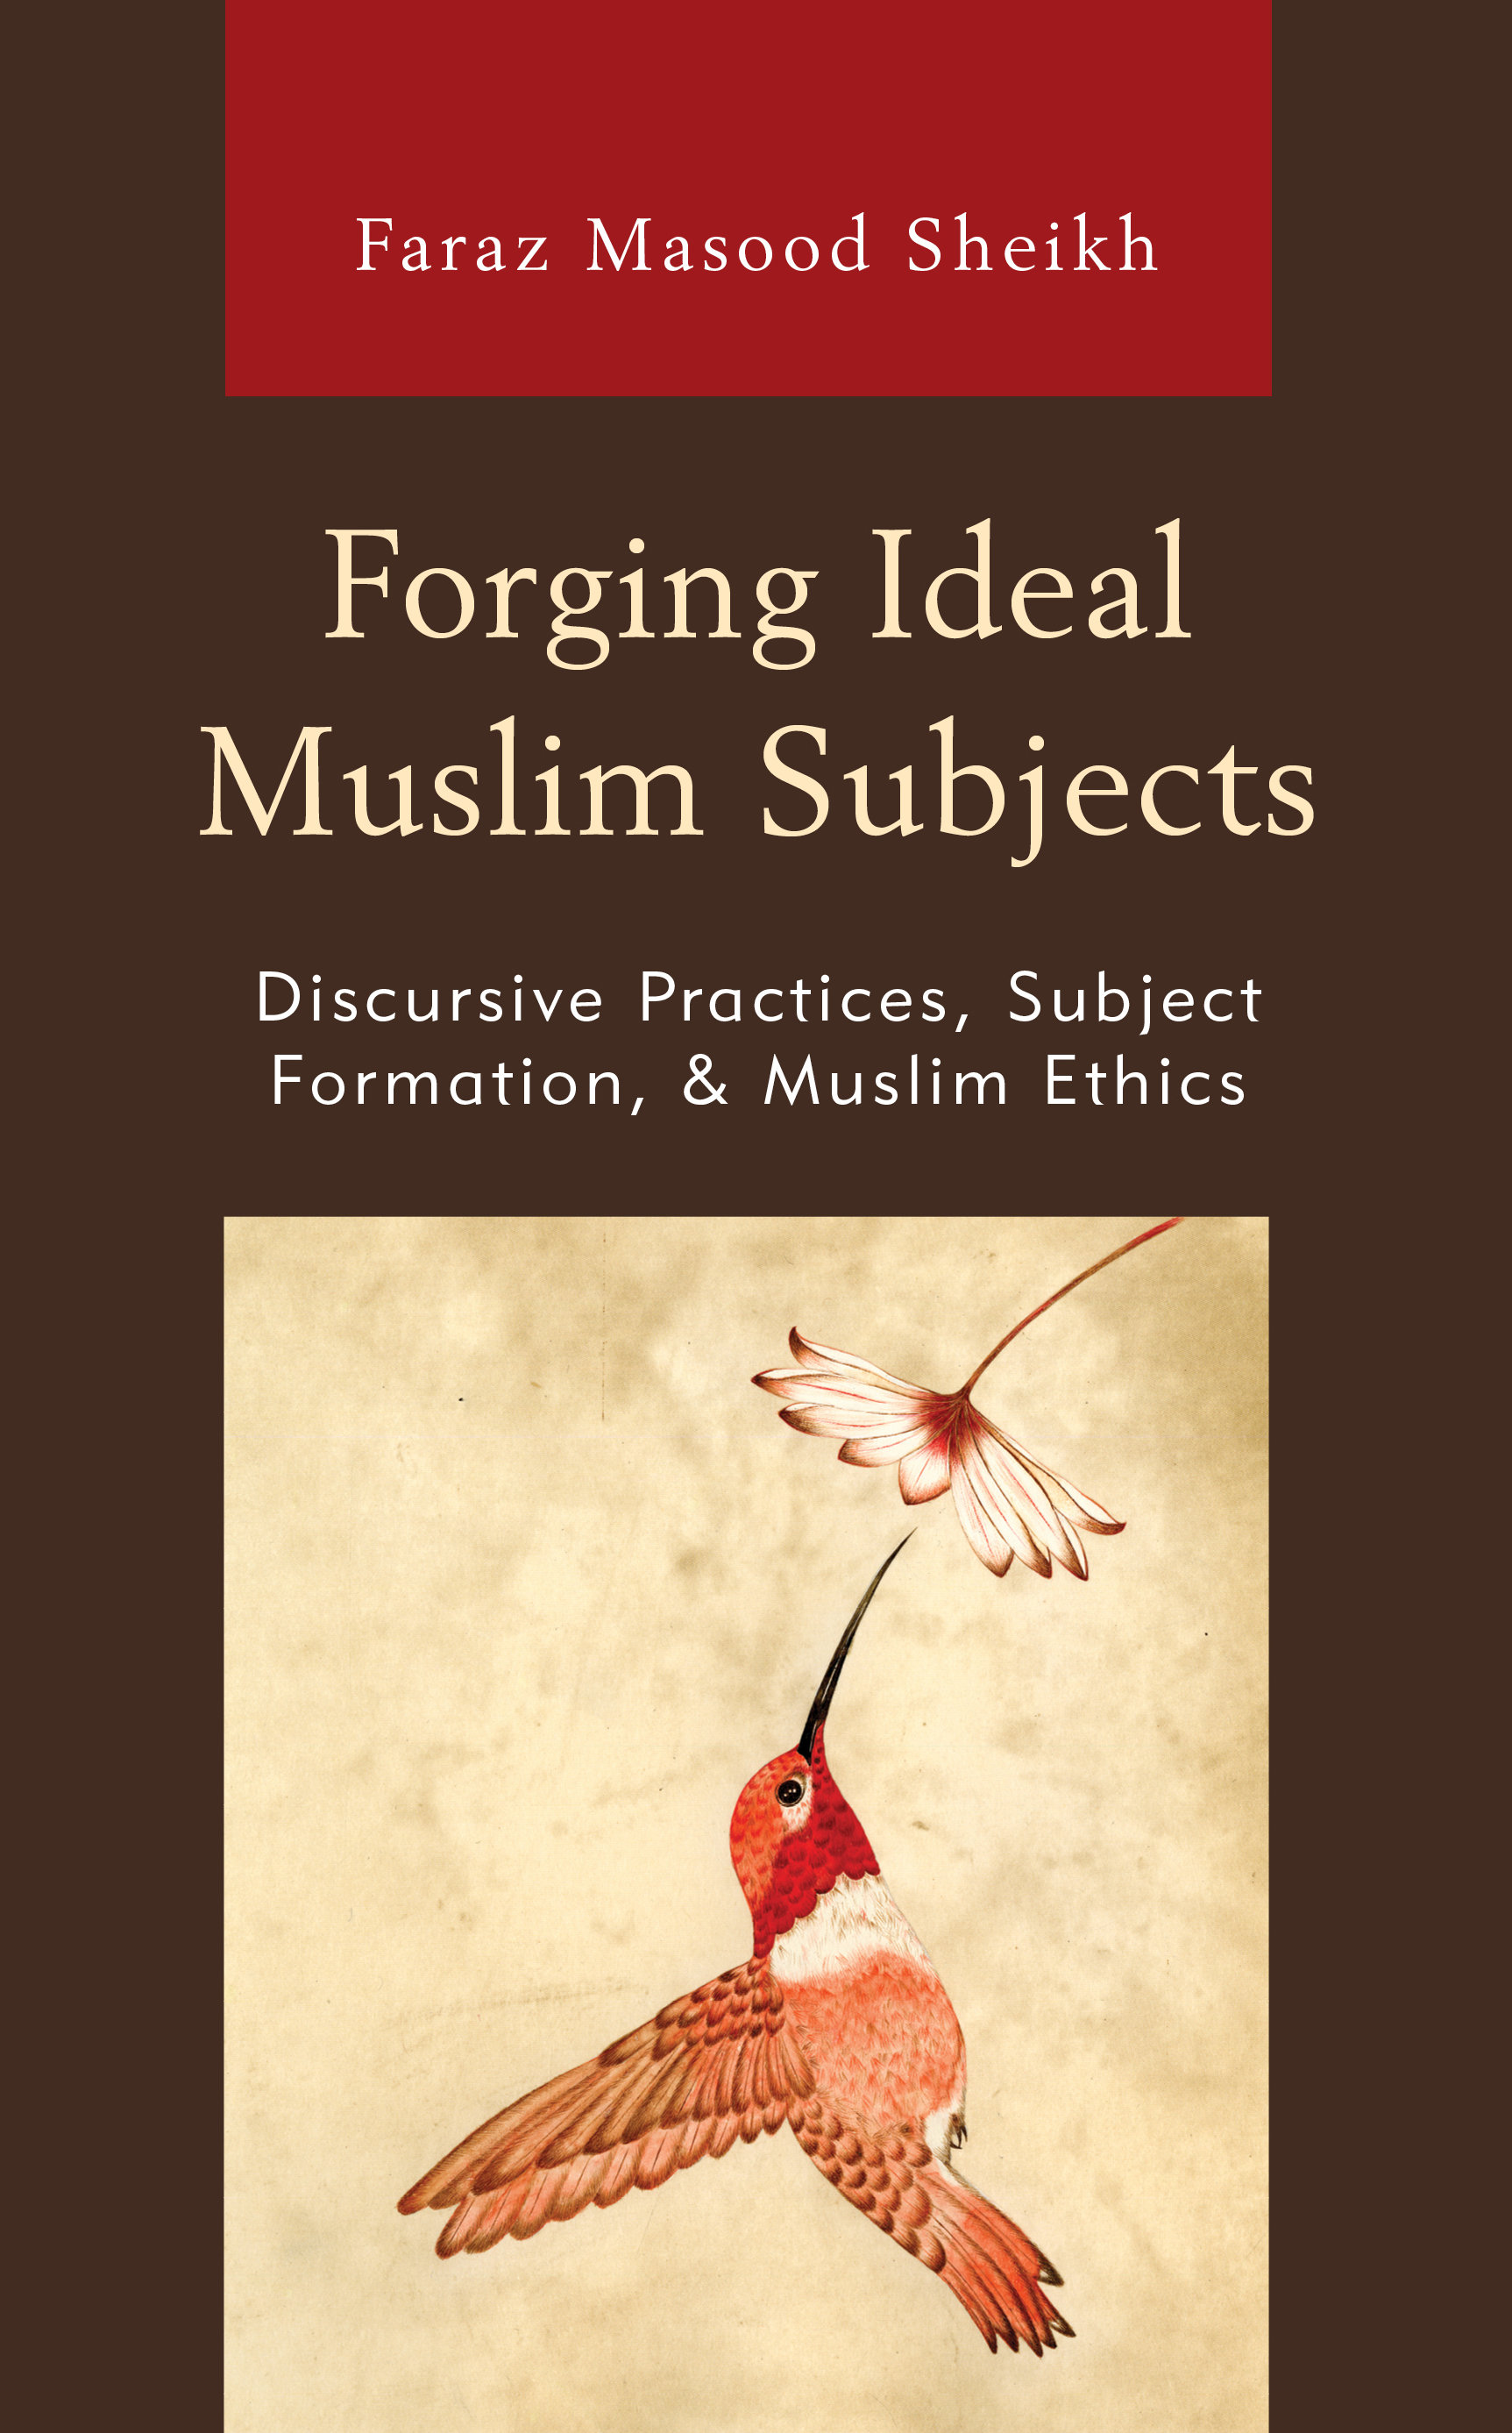 Forging Ideal Muslim Subjects: Discursive Practices, Subject Formation, & Muslim Ethics